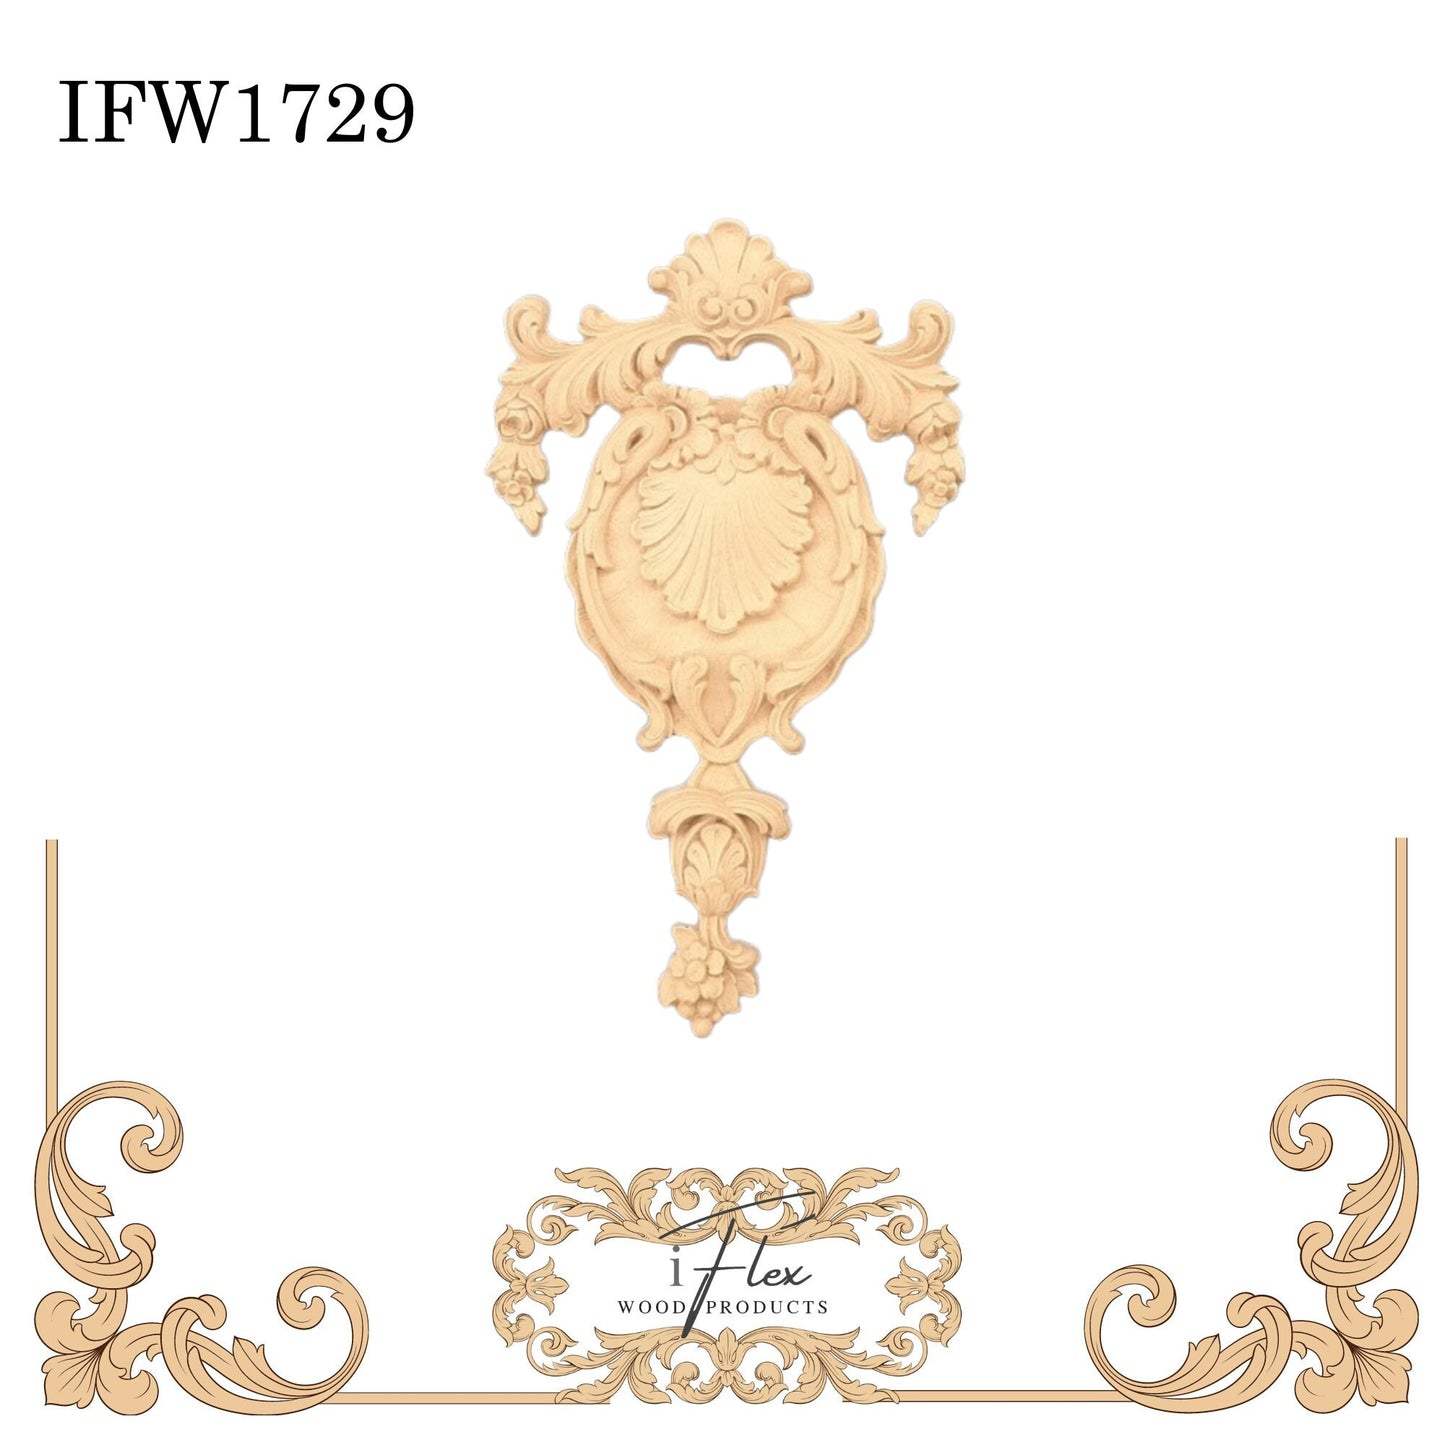 IFW 1729 iFlex Wood Products, bendable mouldings, flexible, wooden appliques, drop